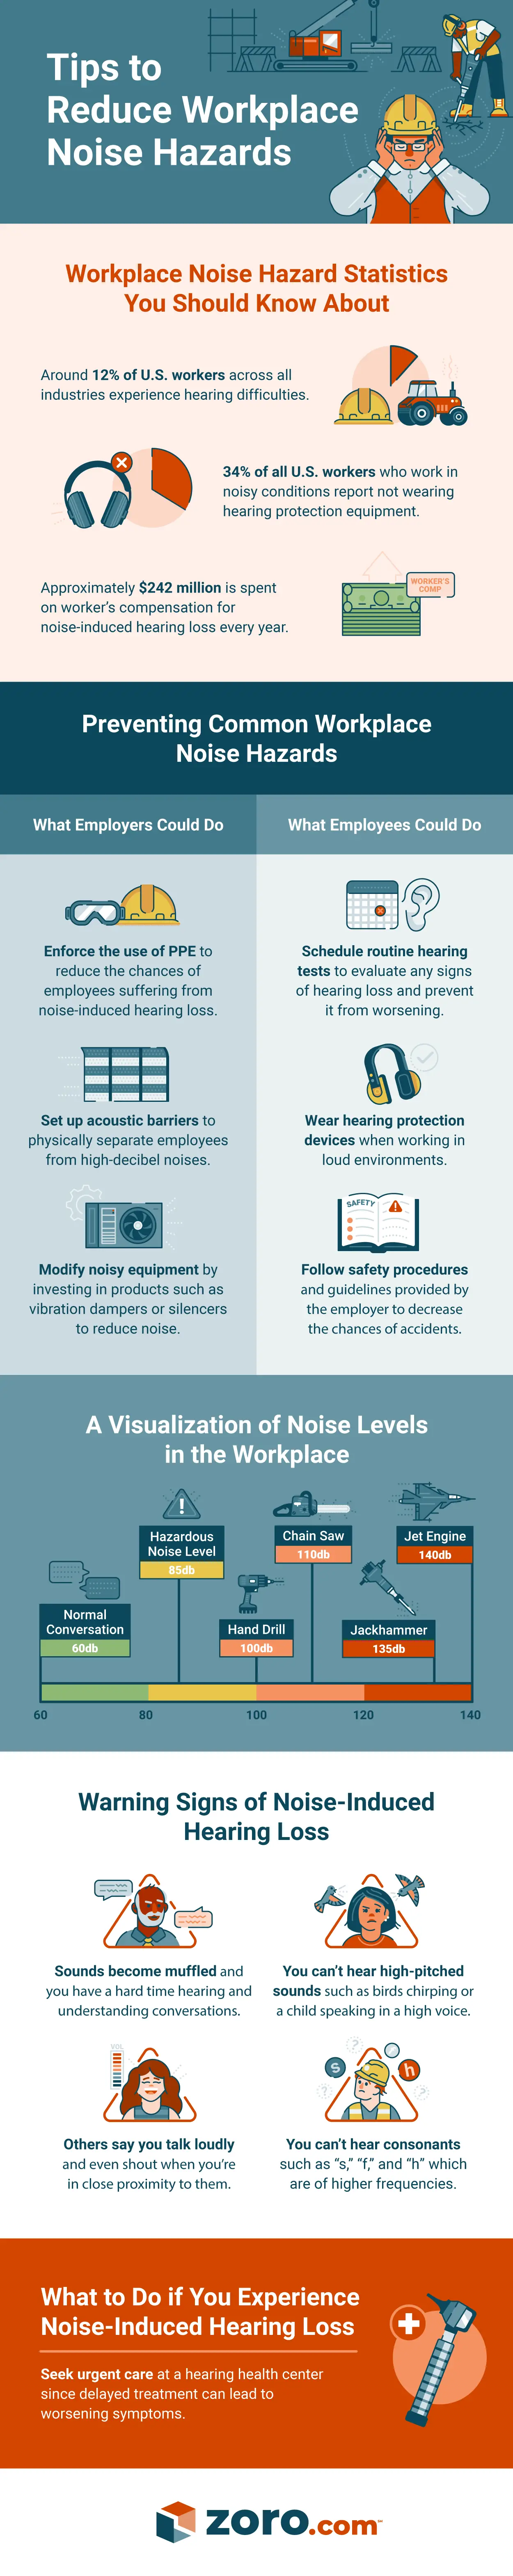 tips-to-reduce-workplace-noise-hazards_0.png